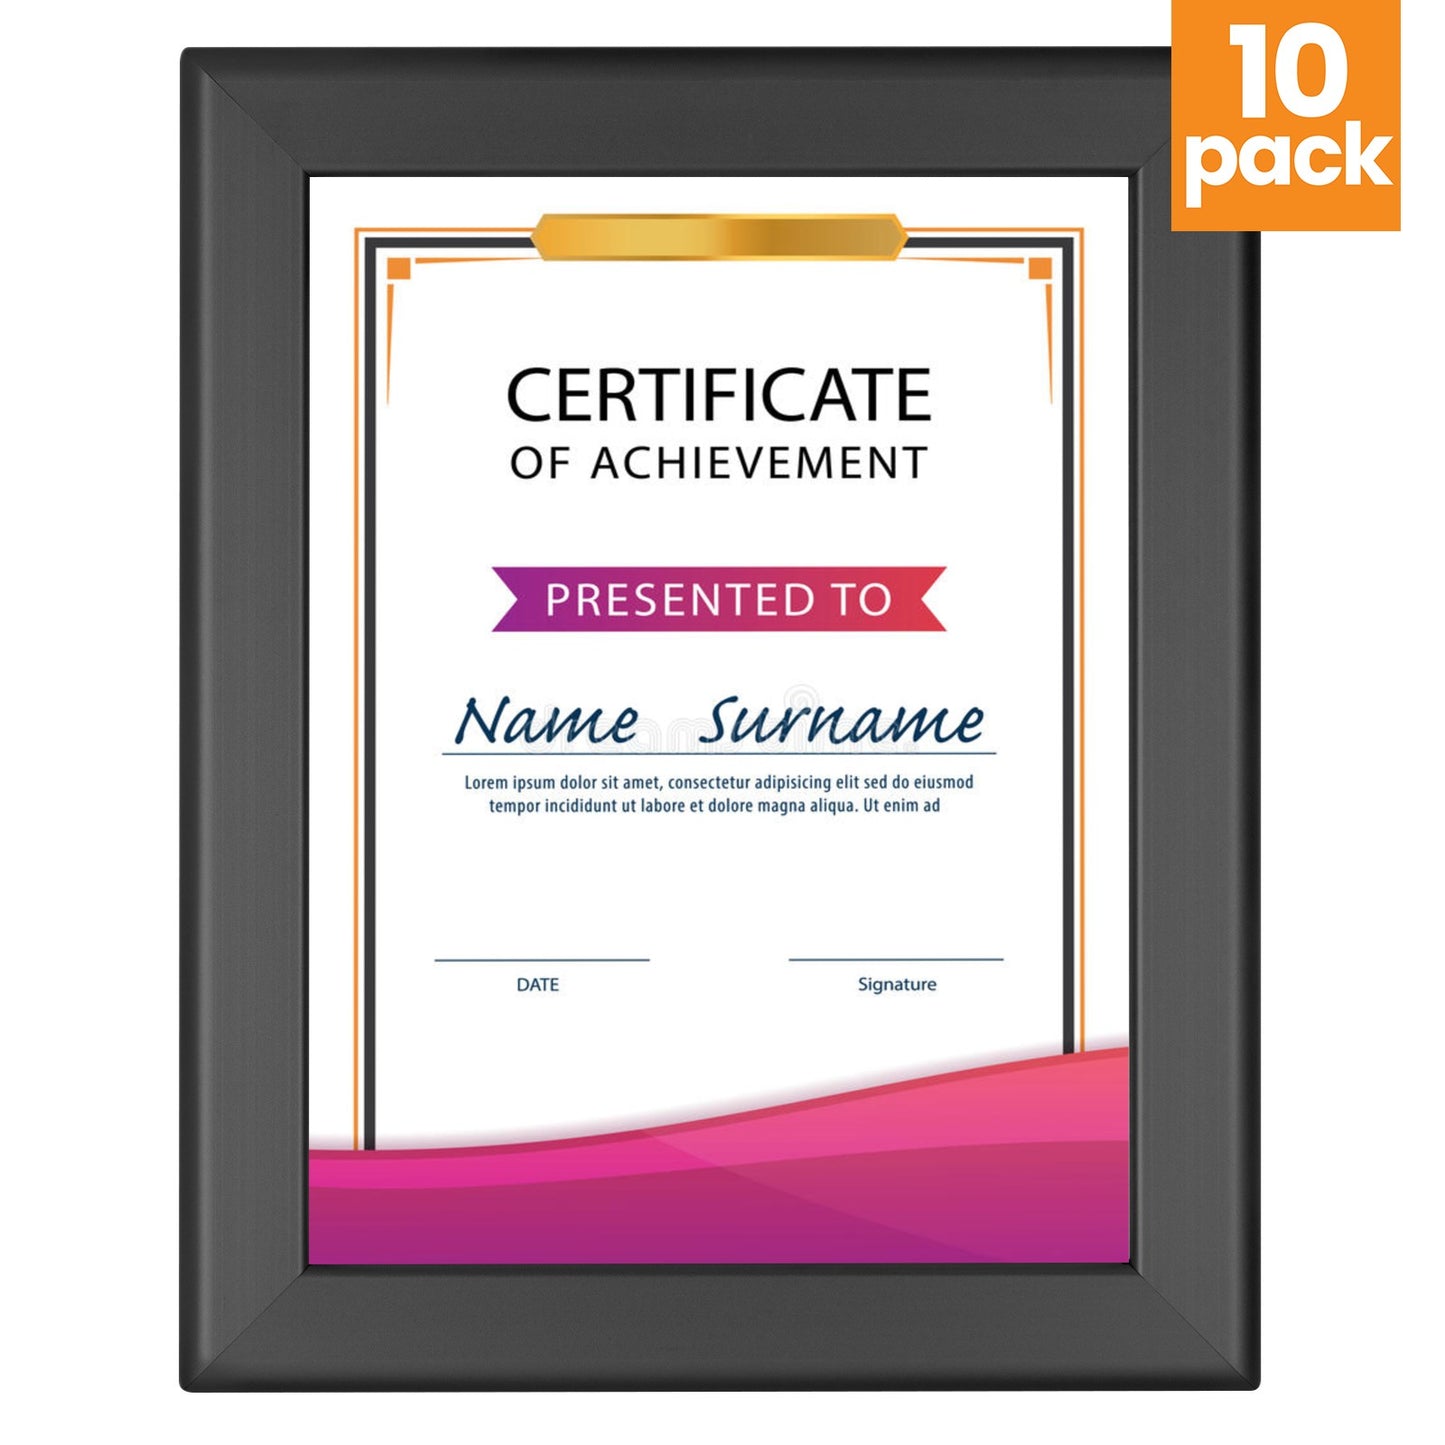 10 Case Pack of Snapezo® of Black 8.5x11 Weather-Resistant Certificate Frame - 1.38" Profile